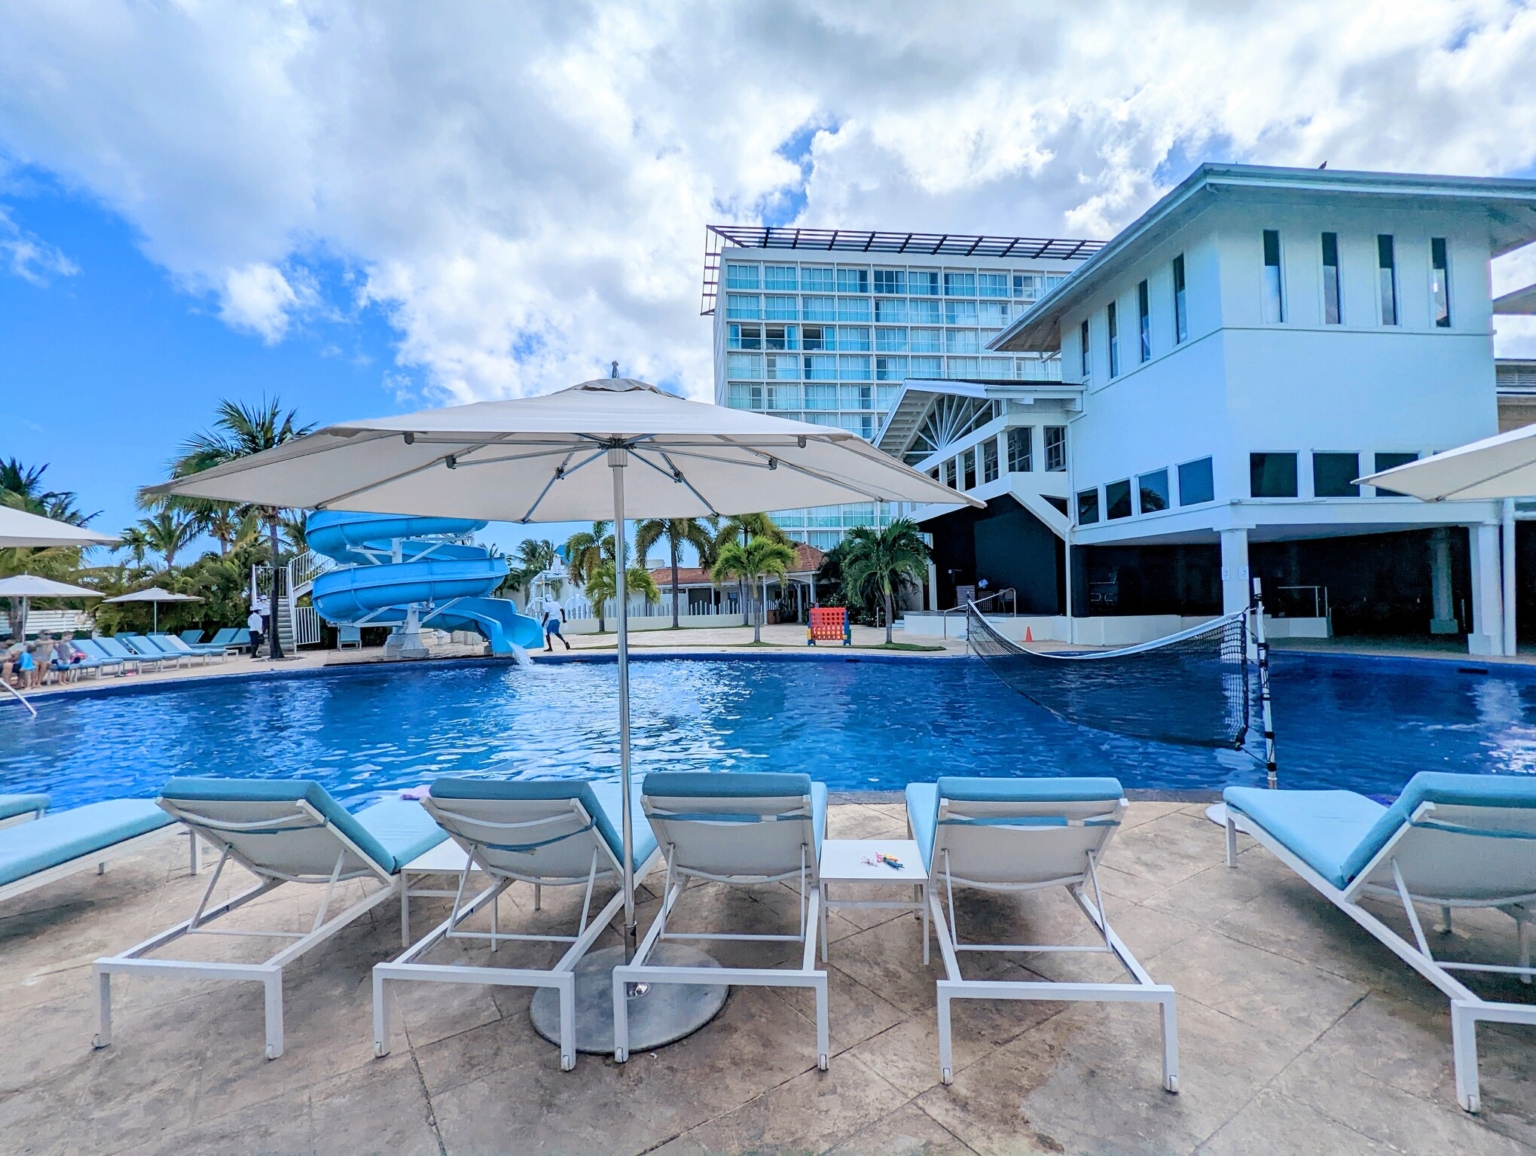 Moon Palace Jamaica Resort Travel Guide – Molly's Travels